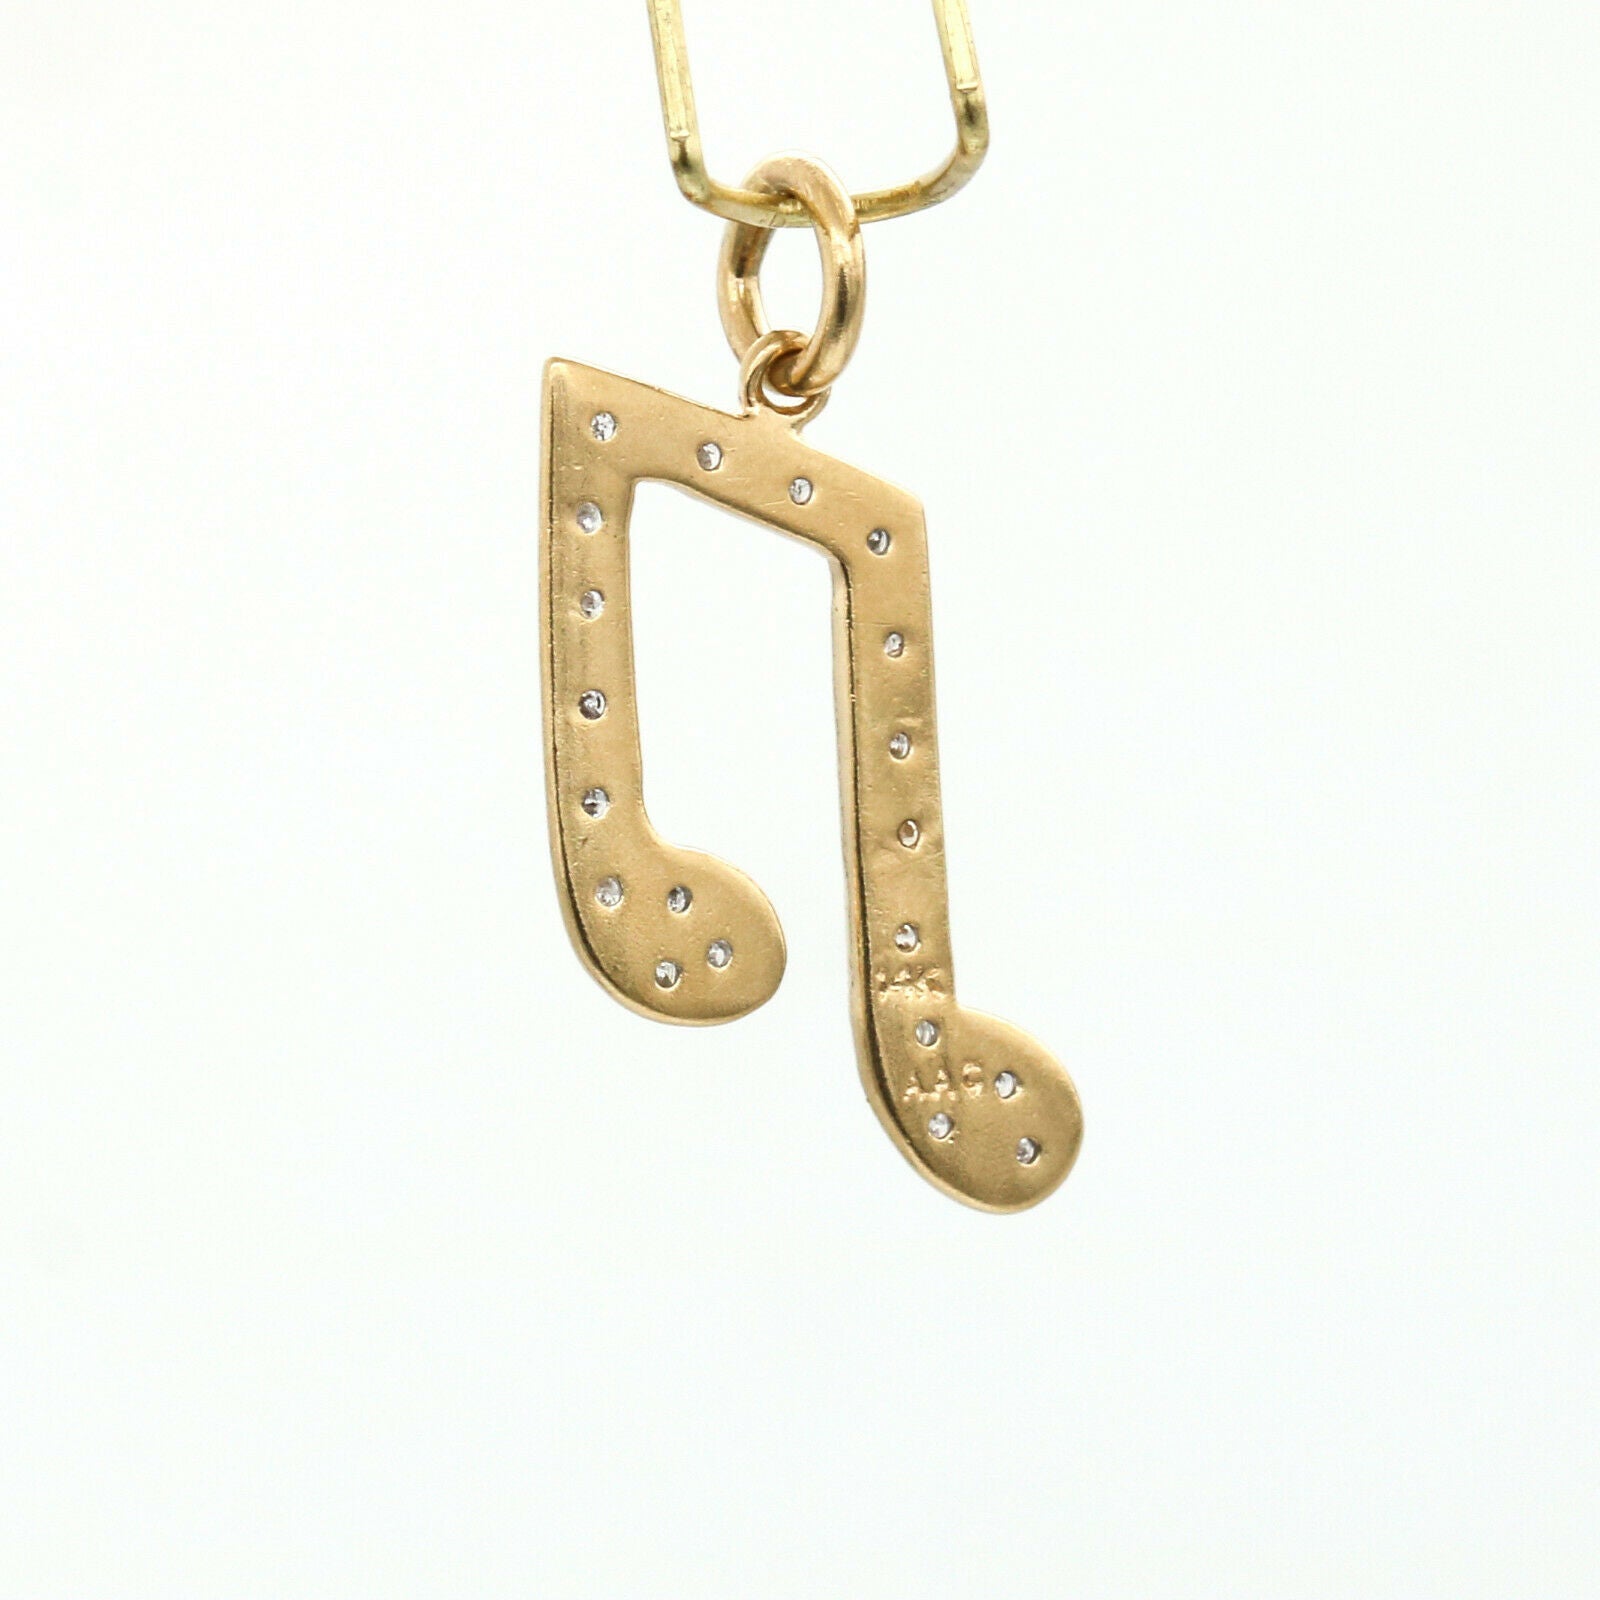 Musical Note Pave Diamond Charm Pendant in 14k Yellow Gold